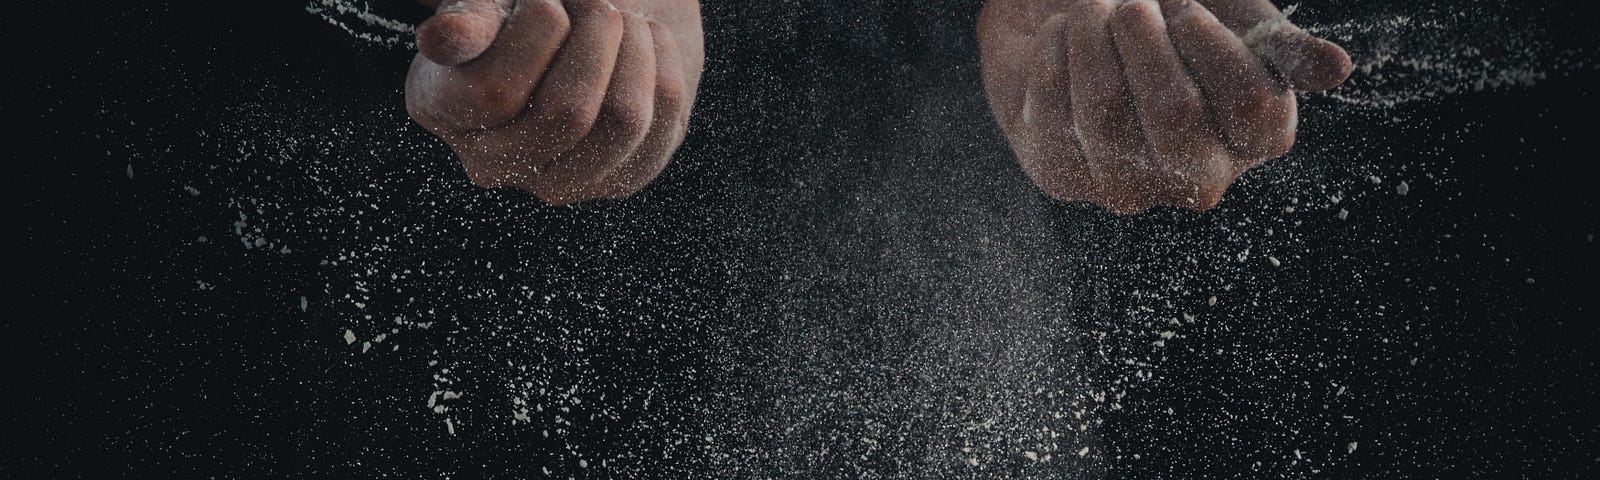 The powder of flour falling off from the hands.